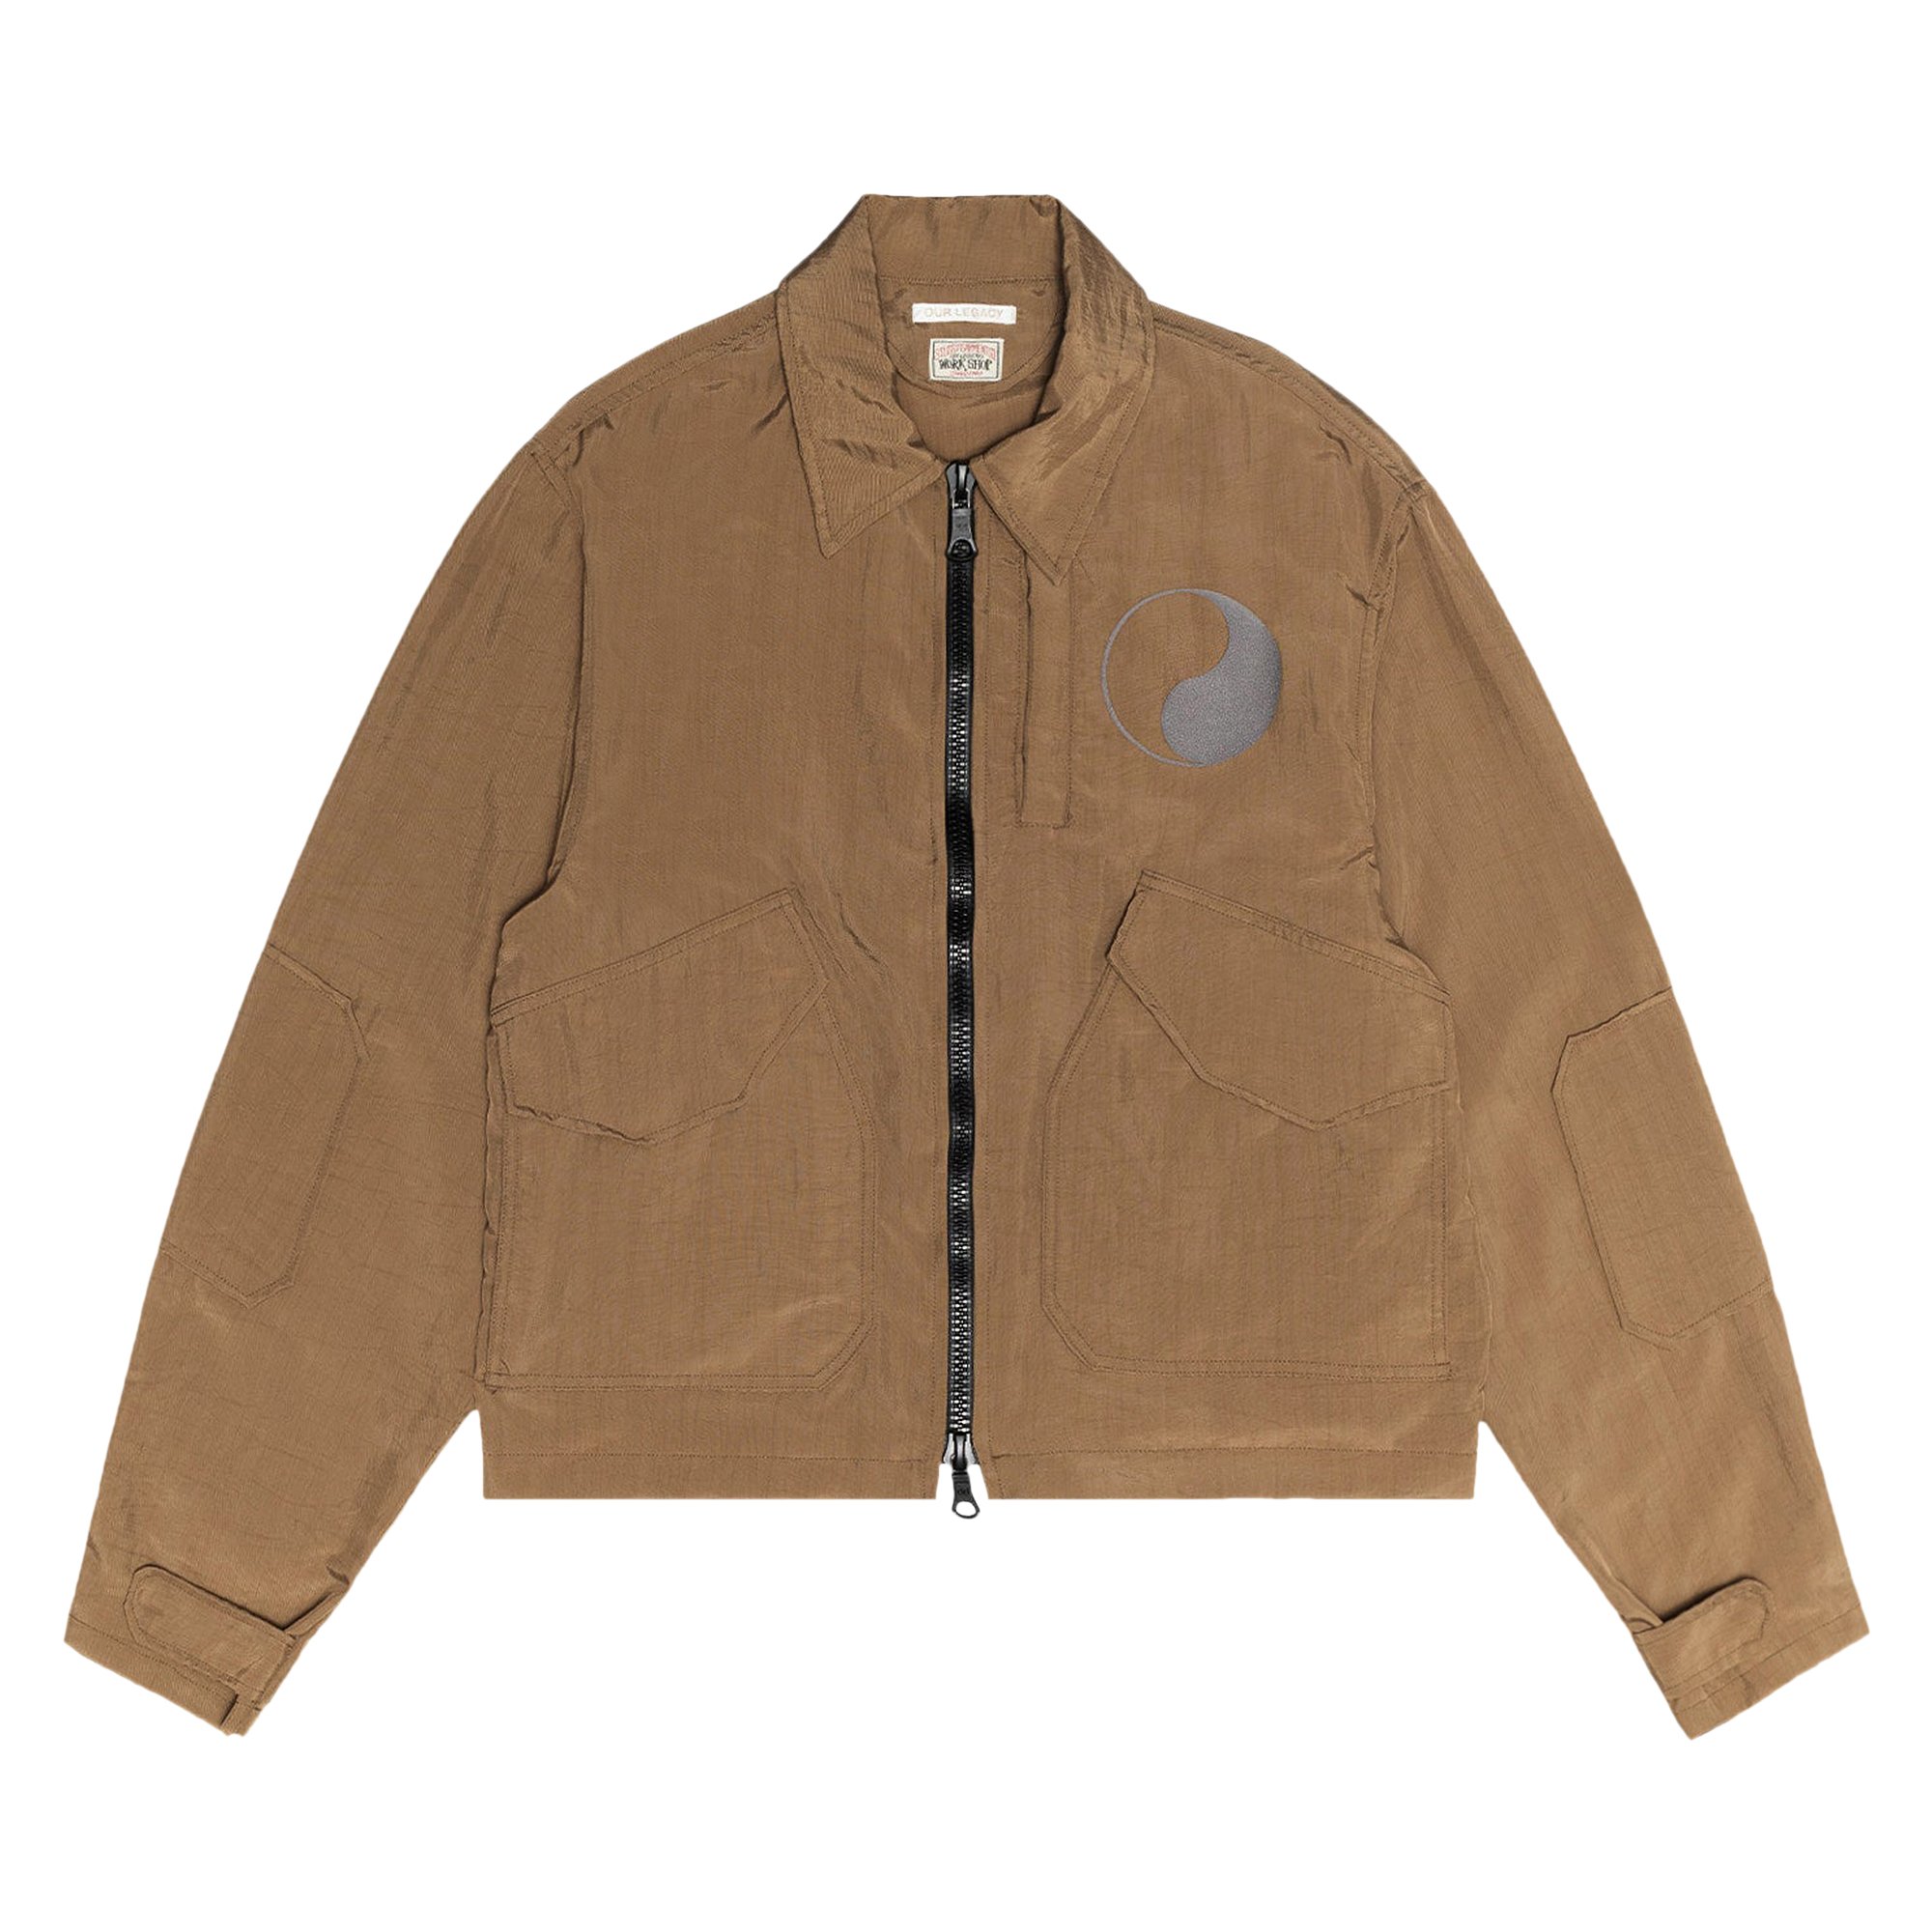 Stussy x Our Legacy Work Shop Pararescue Jacket 'Muddy Mustard Tech Canvas'